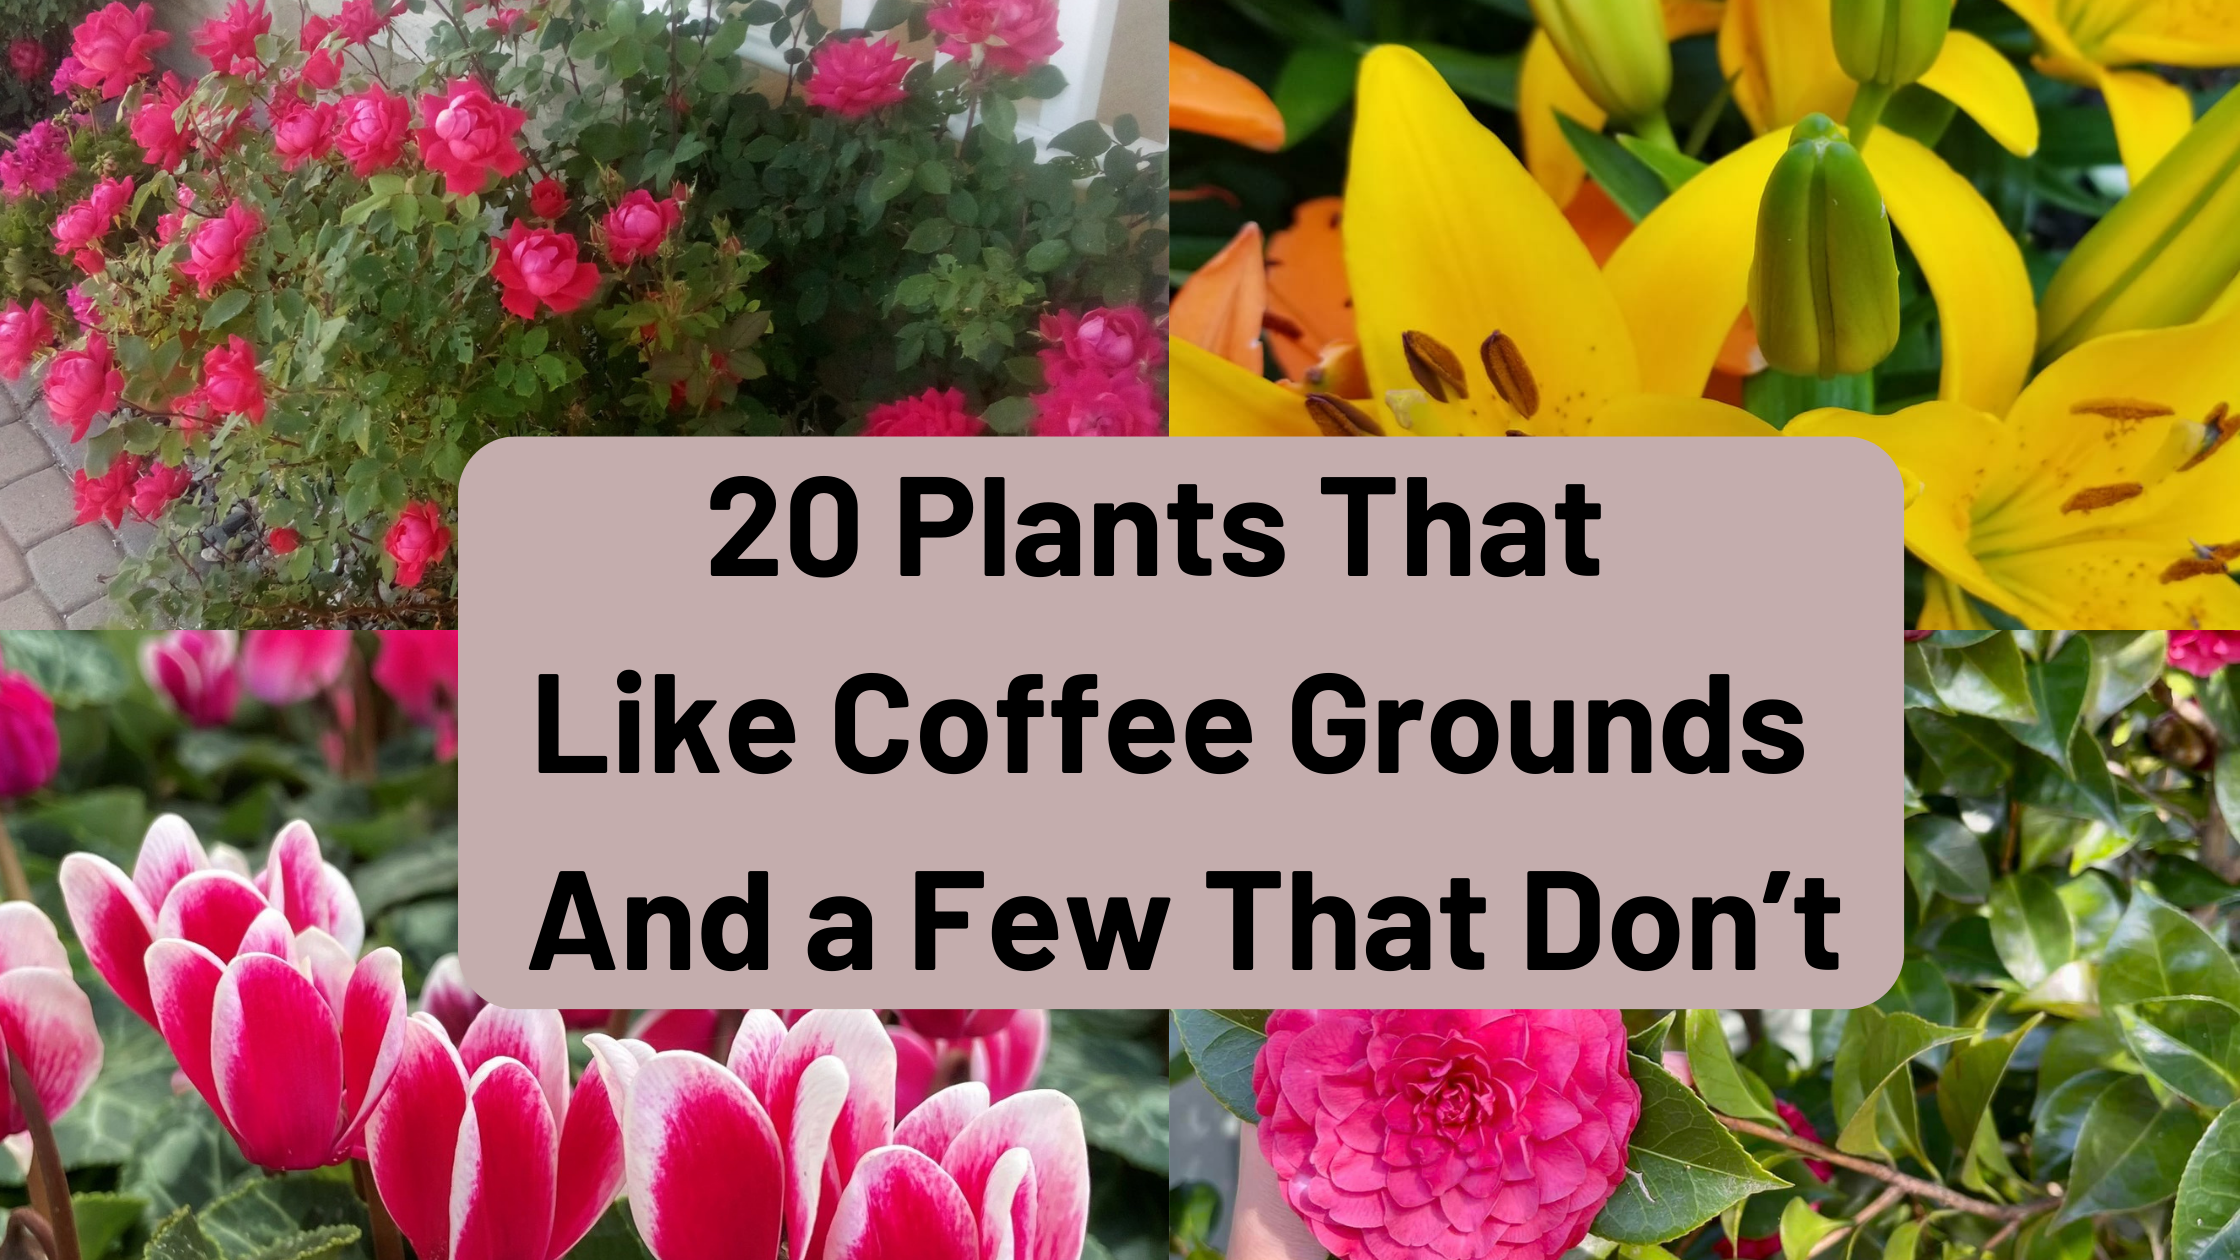 Plants That Like Coffee Grounds And a Few That Don’t